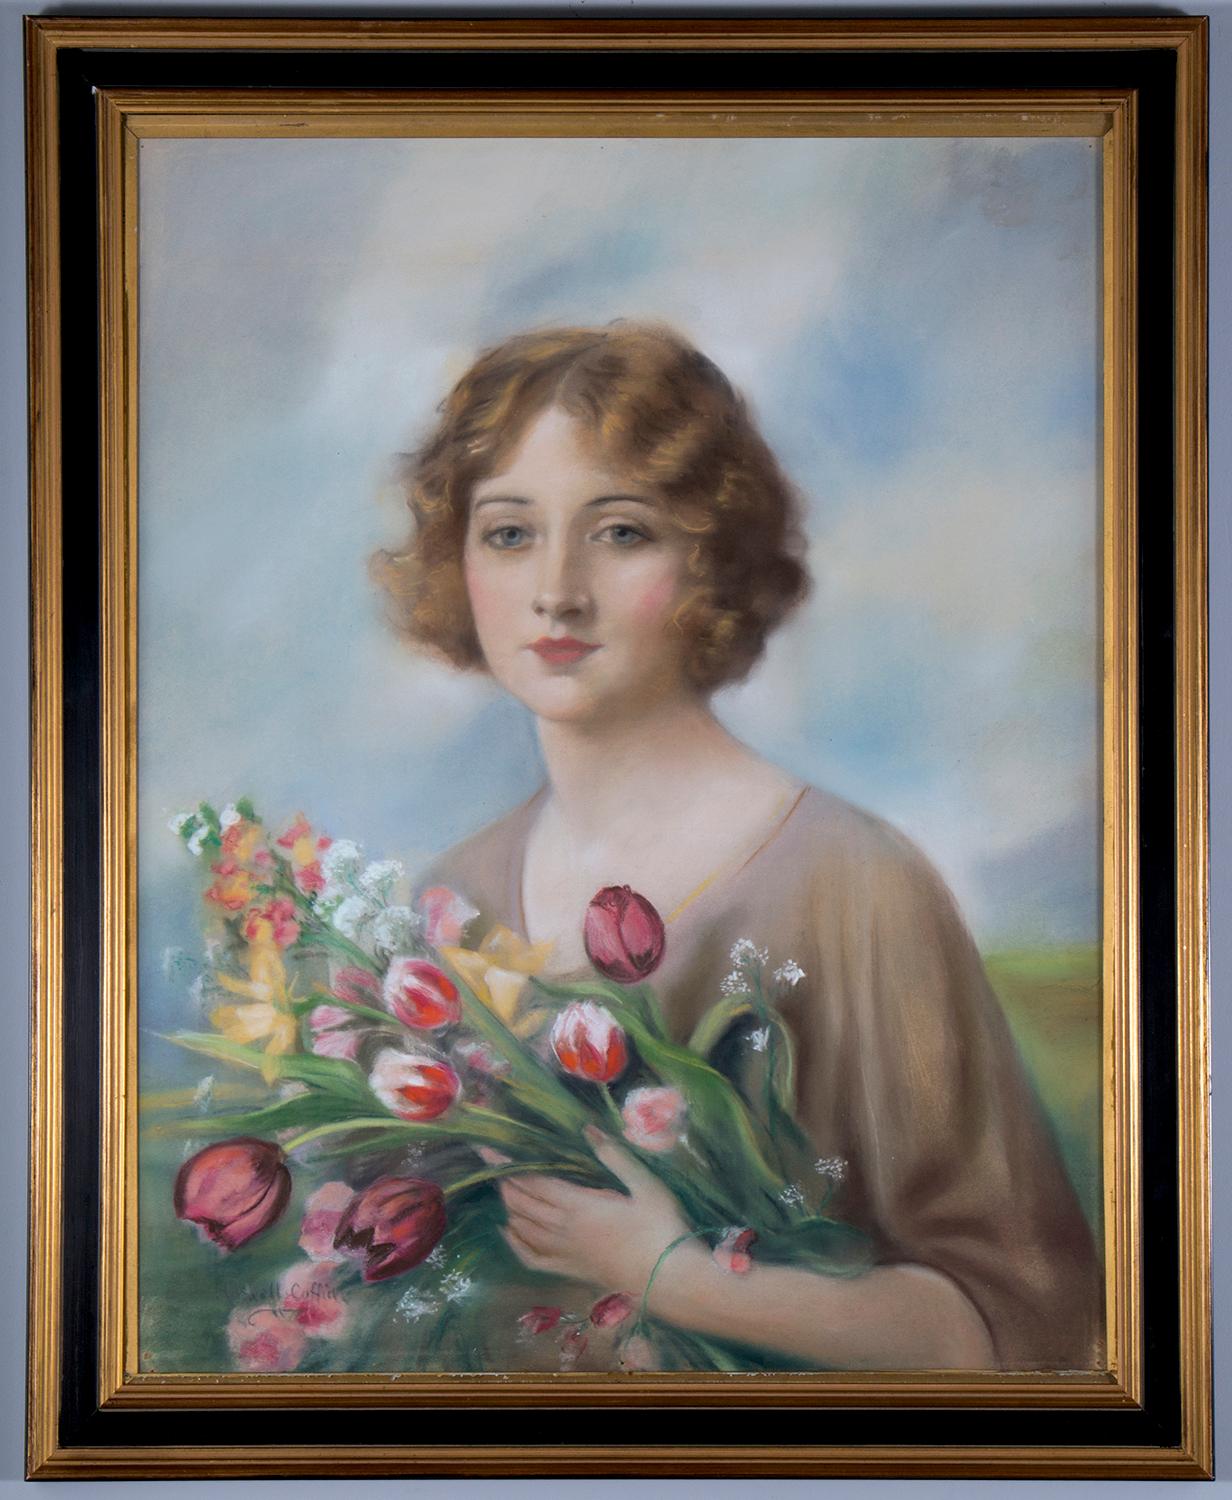 A Red Book Cover Girl With Flowers - Painting by William Haskell Coffin